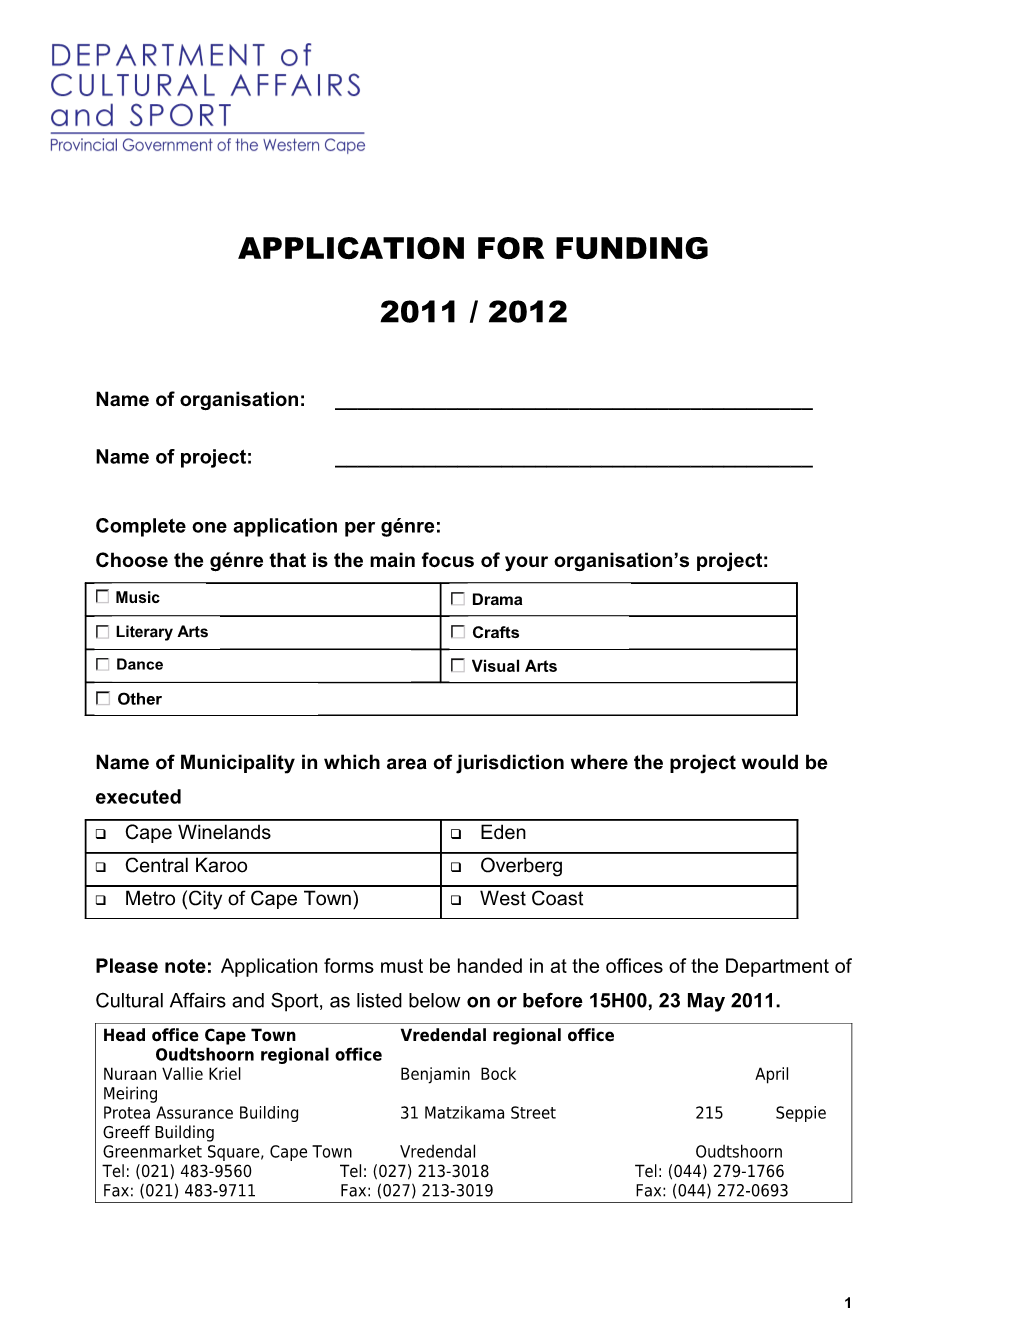 Application for Funding s2